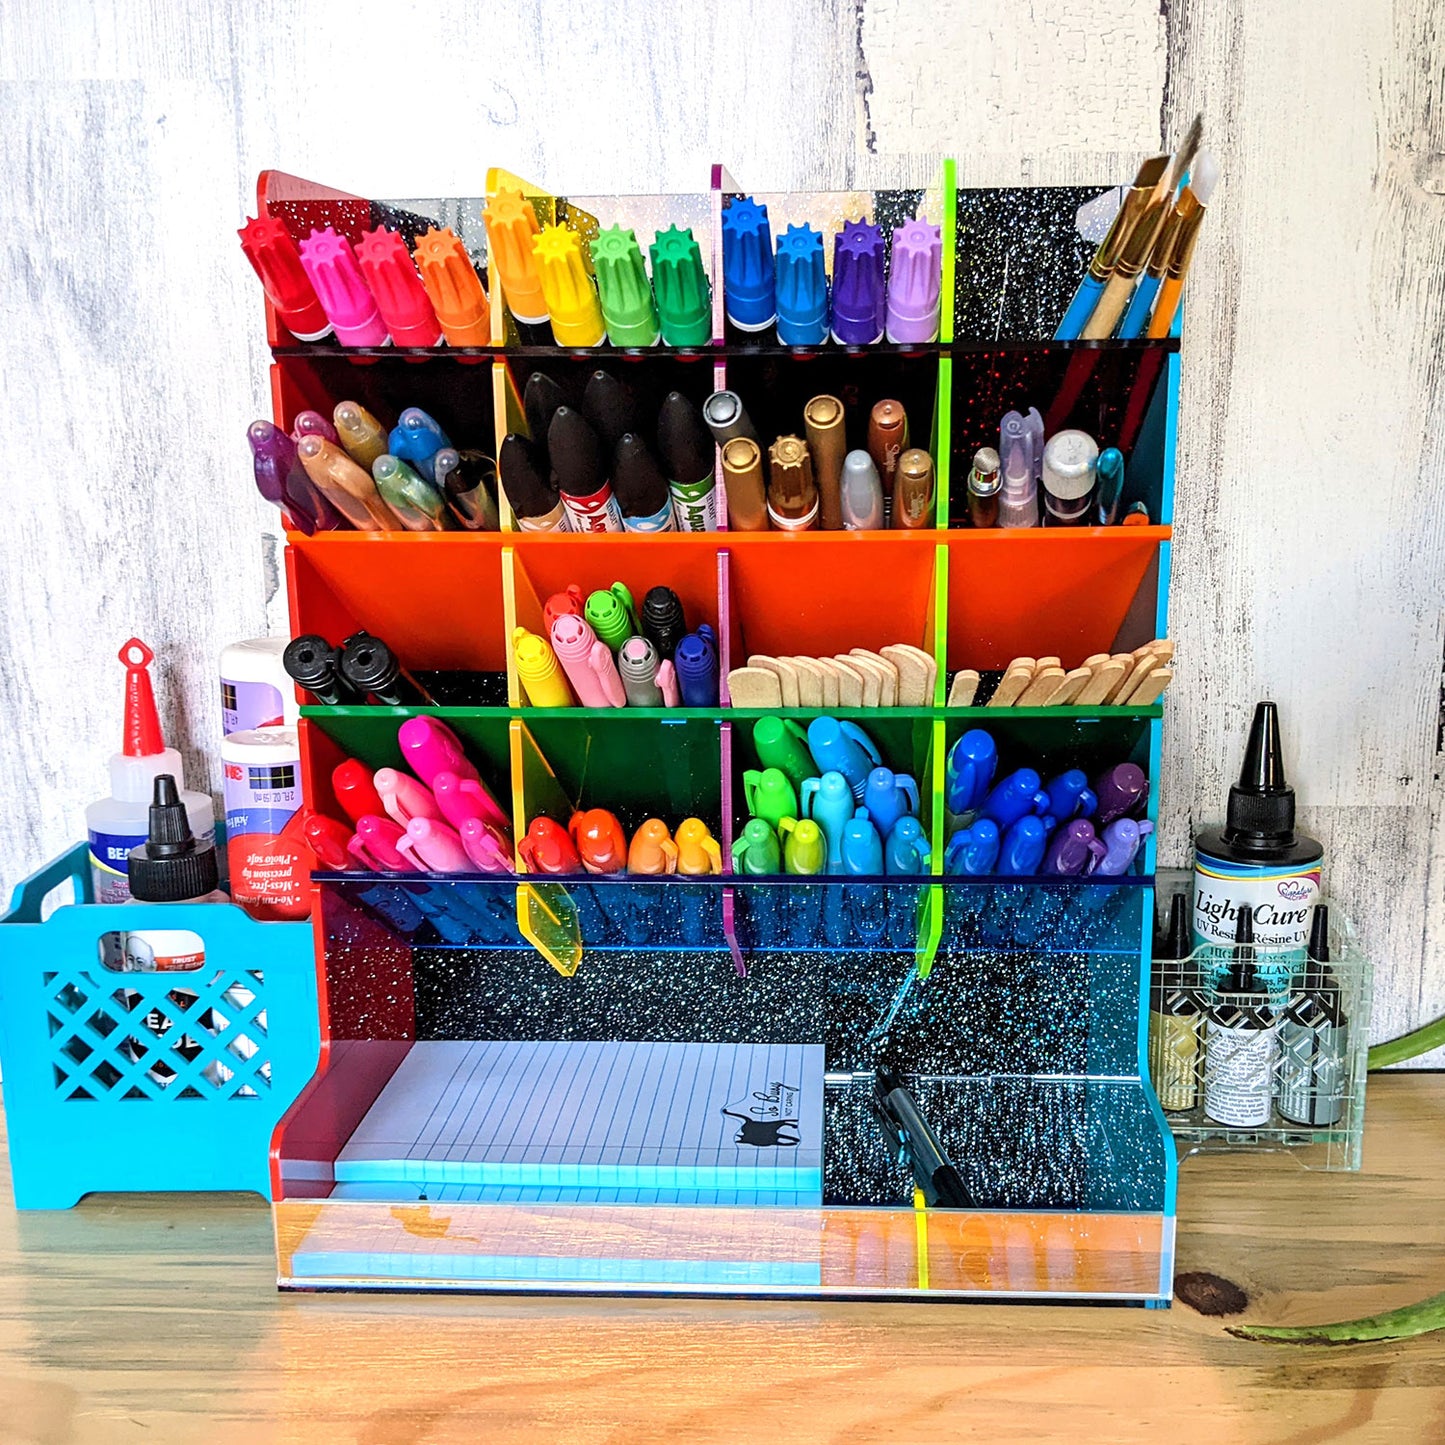 Craft Paint Organizer for 2oz Paint - Made on a Glowforge